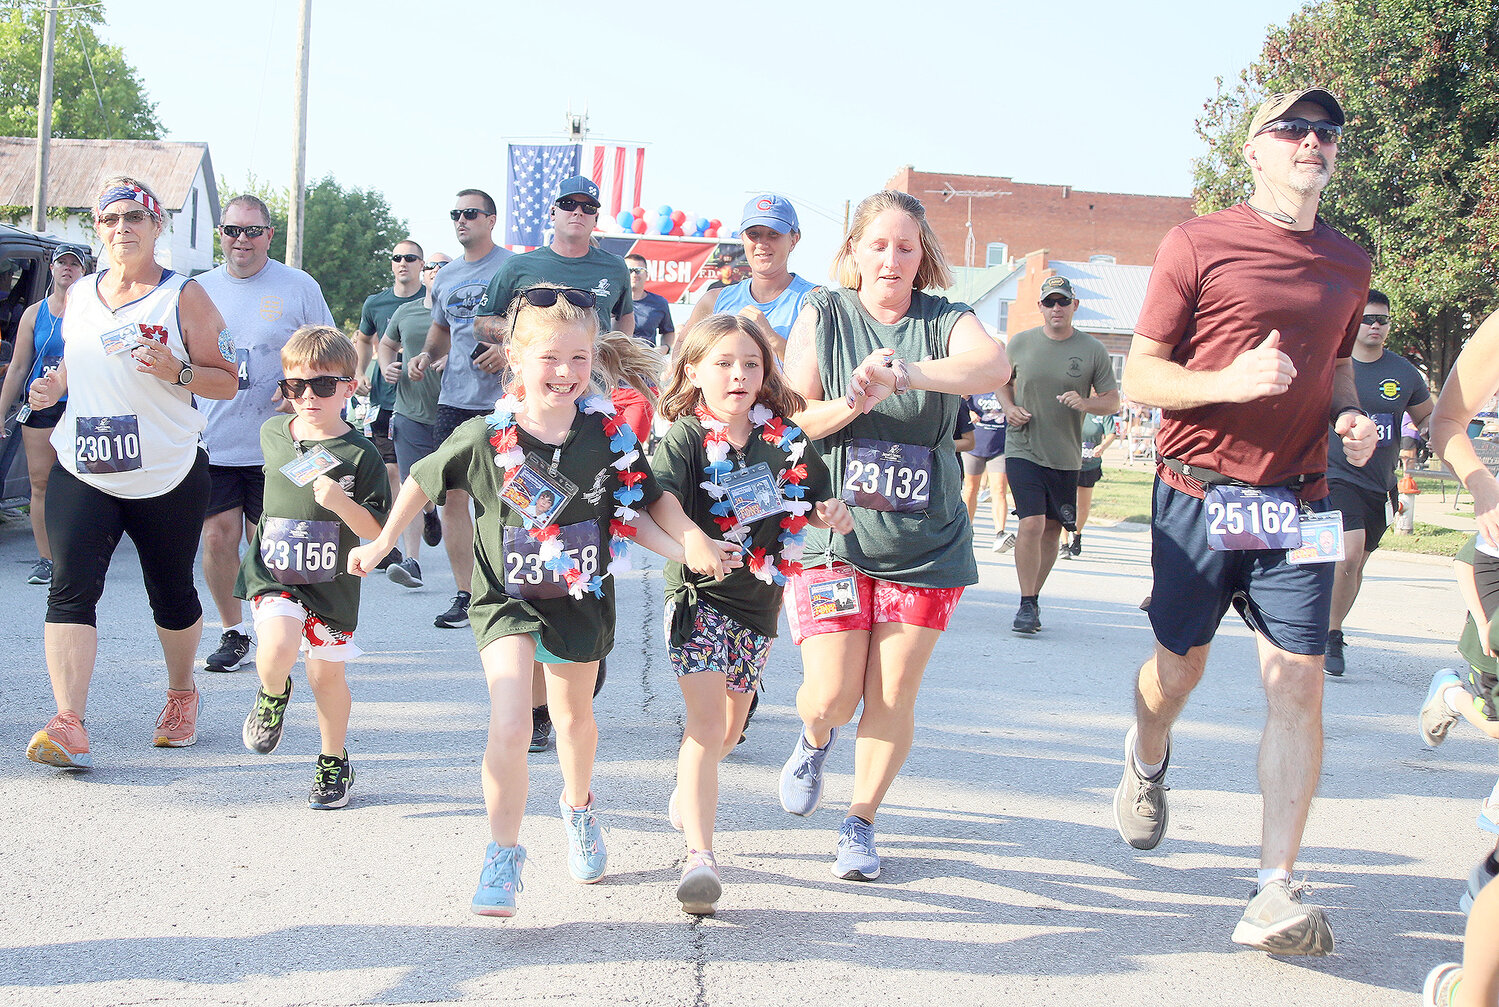 Runners take off from the starting line at the Tunnel to Towers 5K run Tuesday morning July 4th in Donnellson.